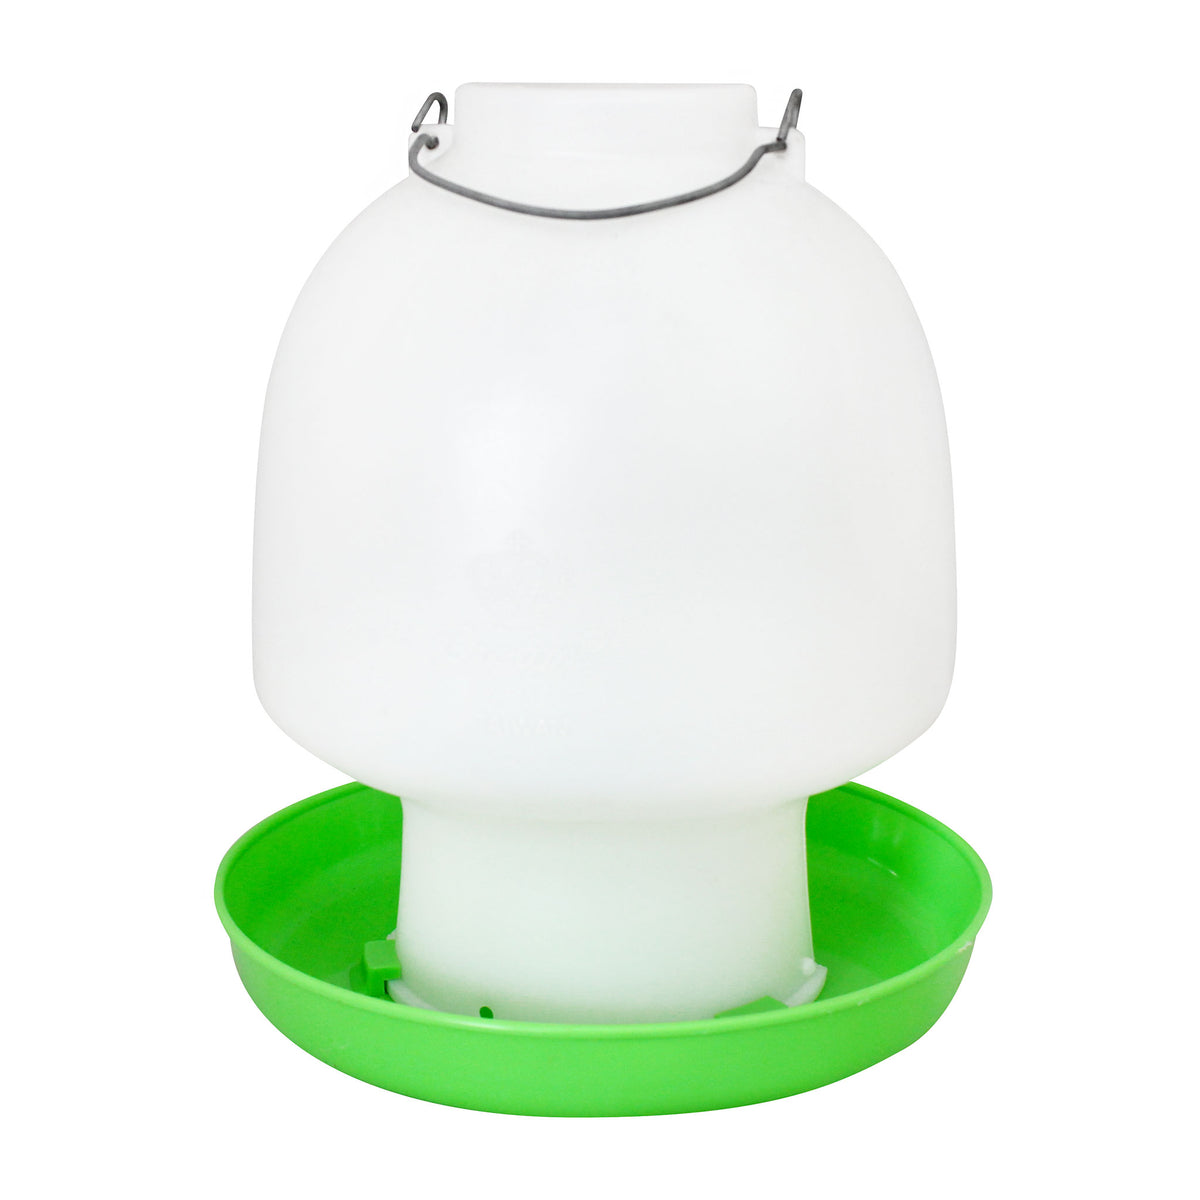 Poultry Crown Drinker Ball Type